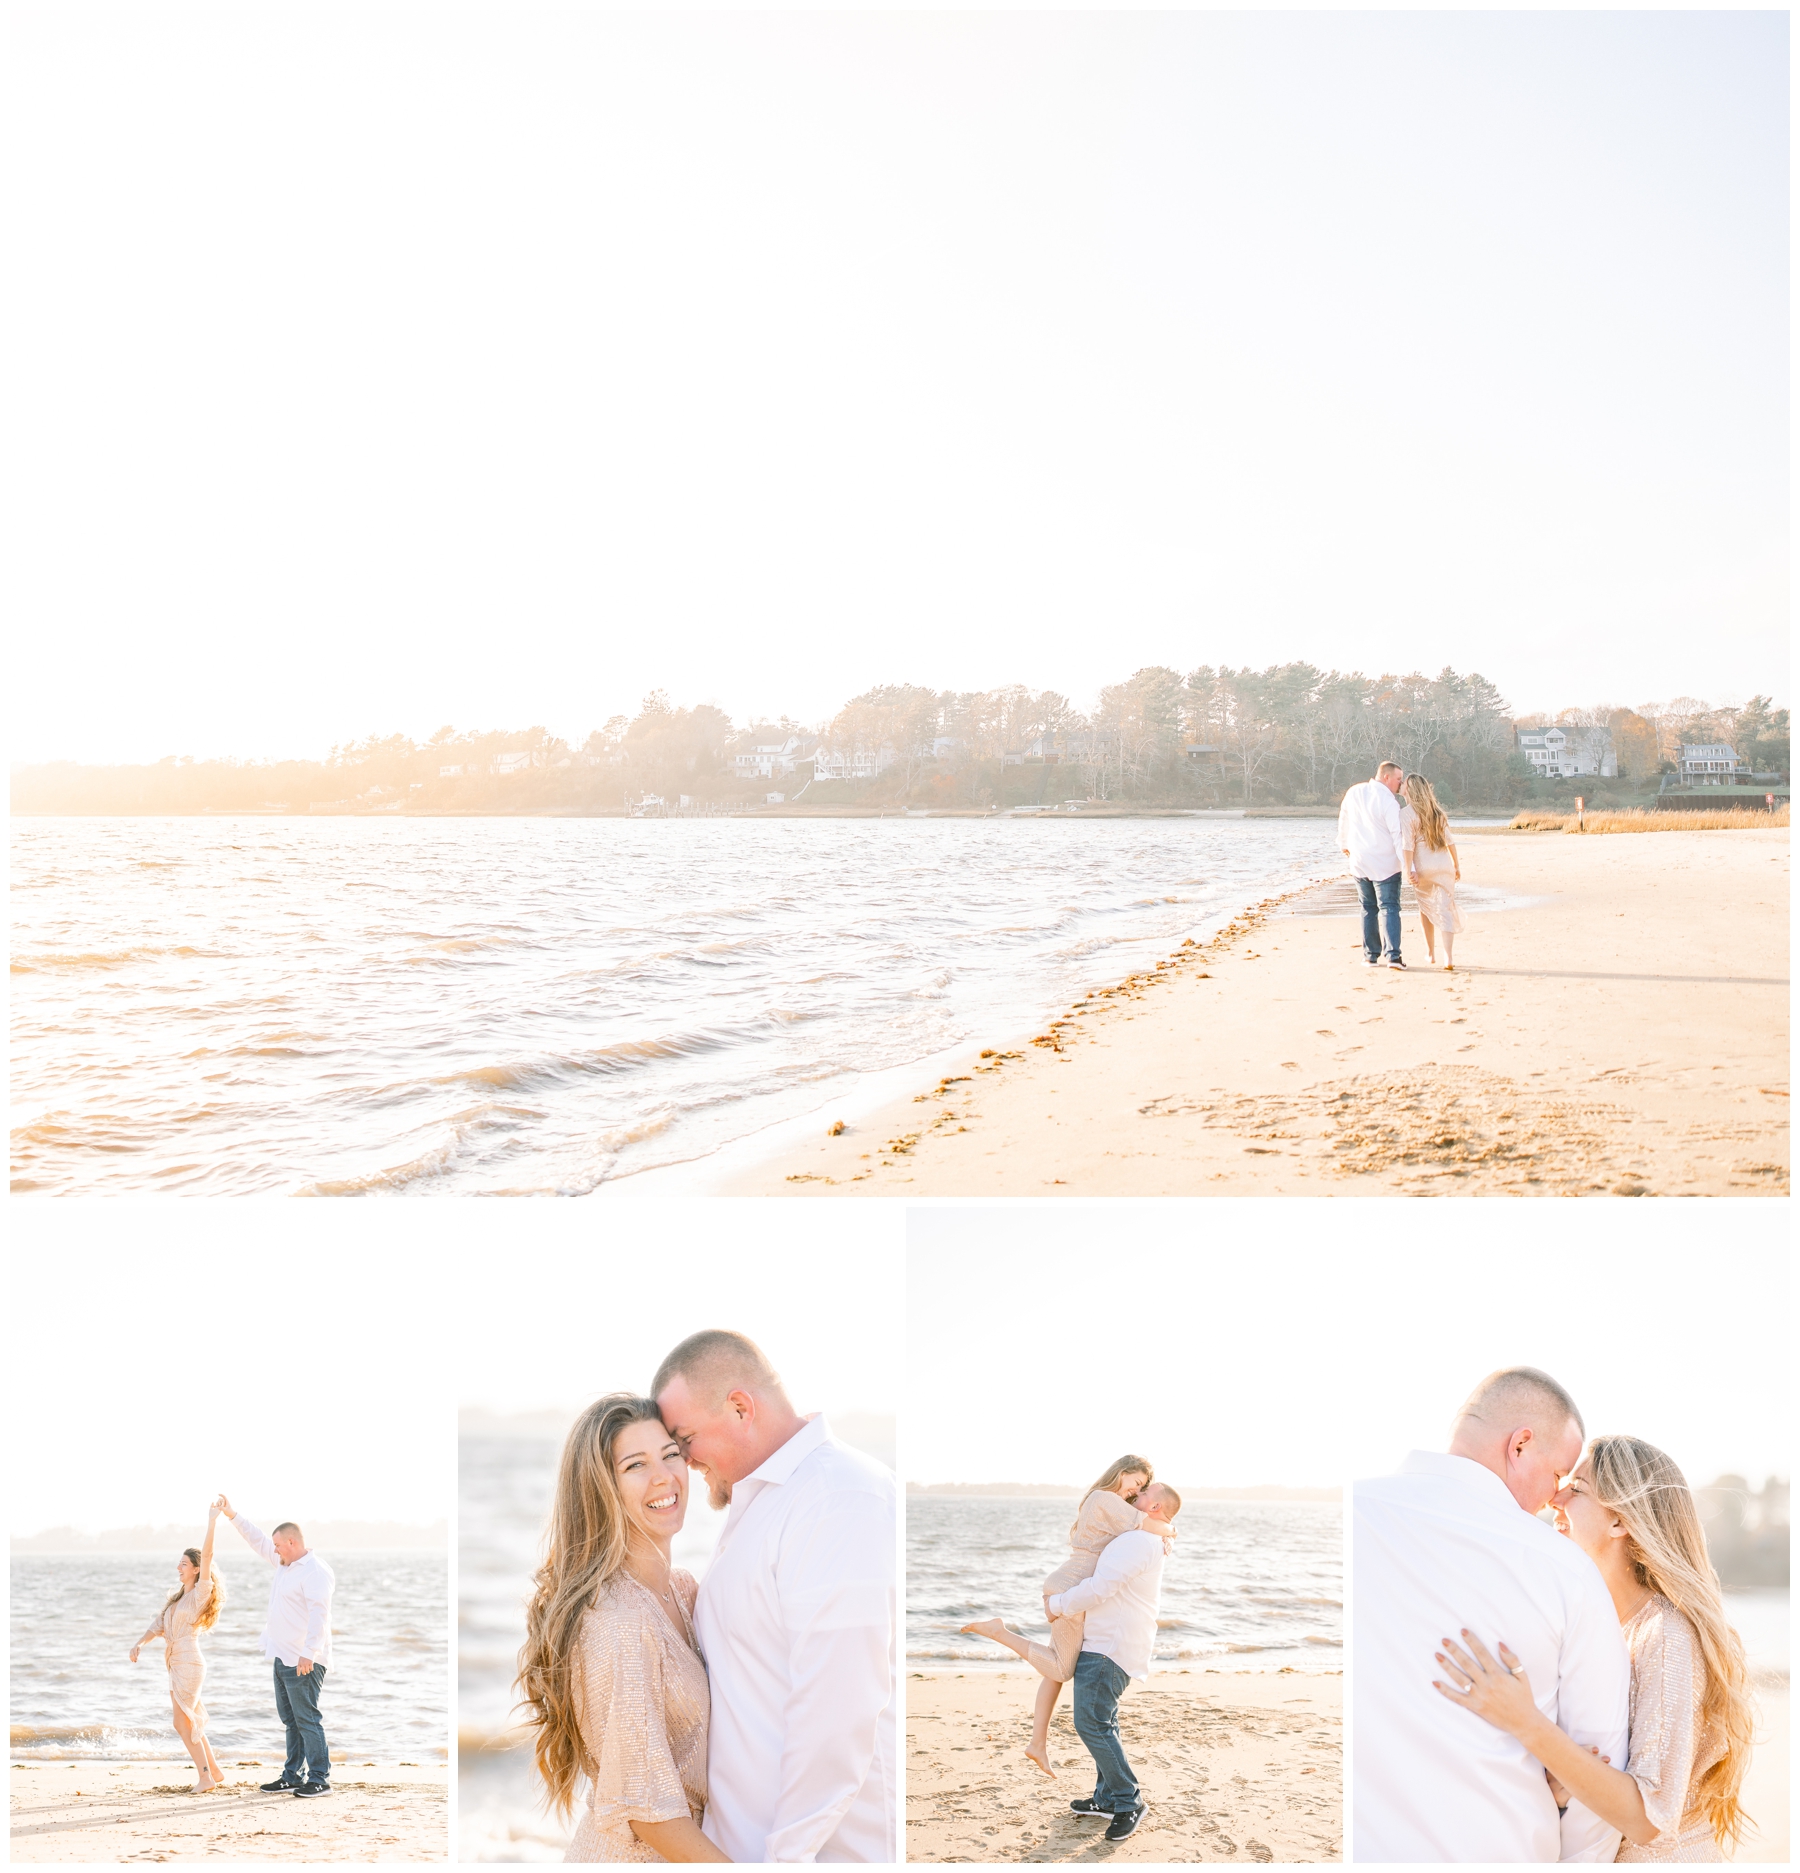 Cape Cod Beach Engagement Session in November 